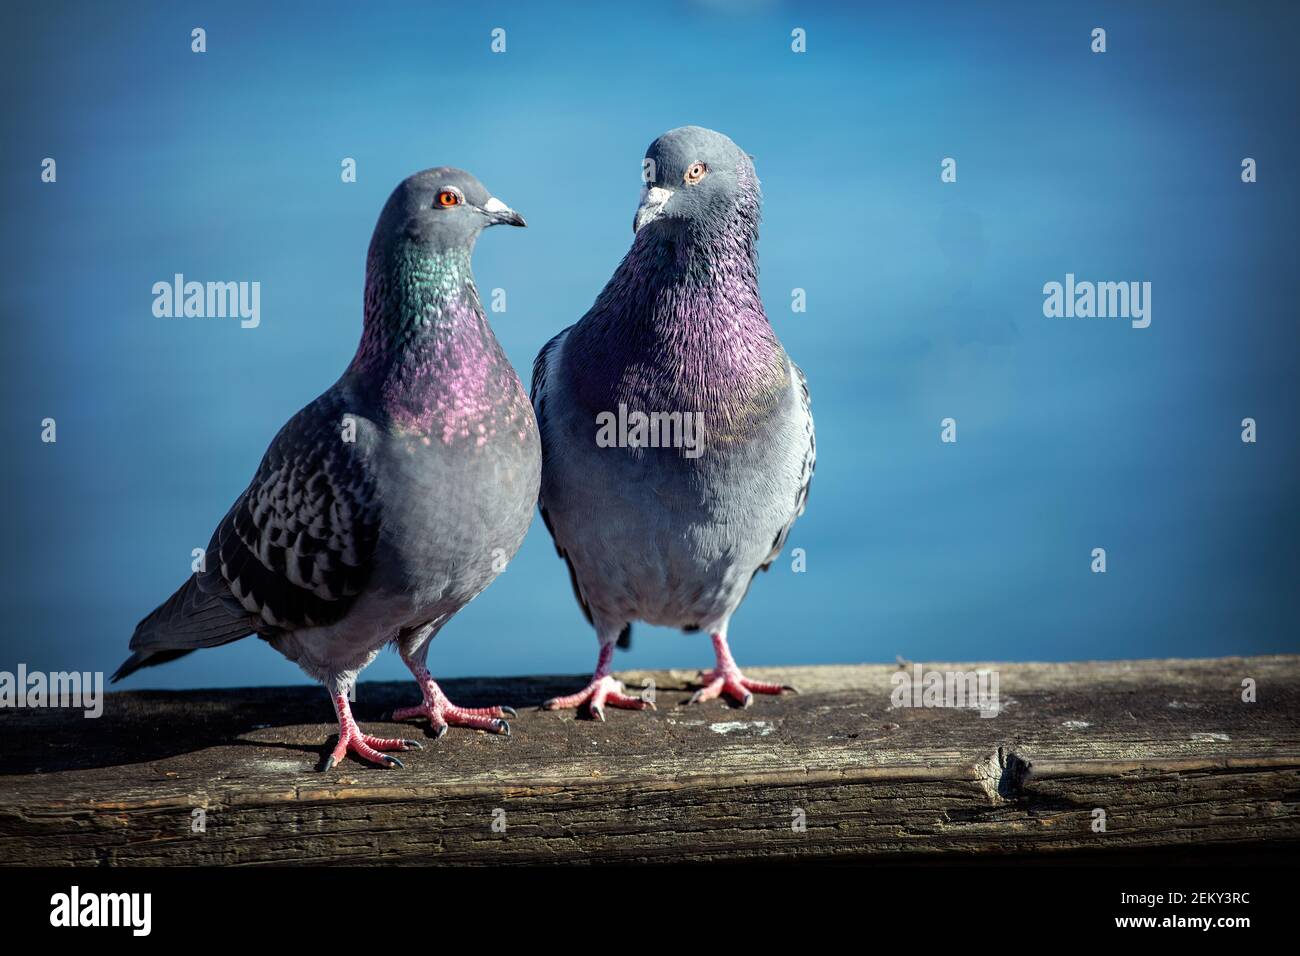 A pair of Rock Dove, rock pigeon, or common pigeon (Columba livia) in Capitola, California Stock Photo